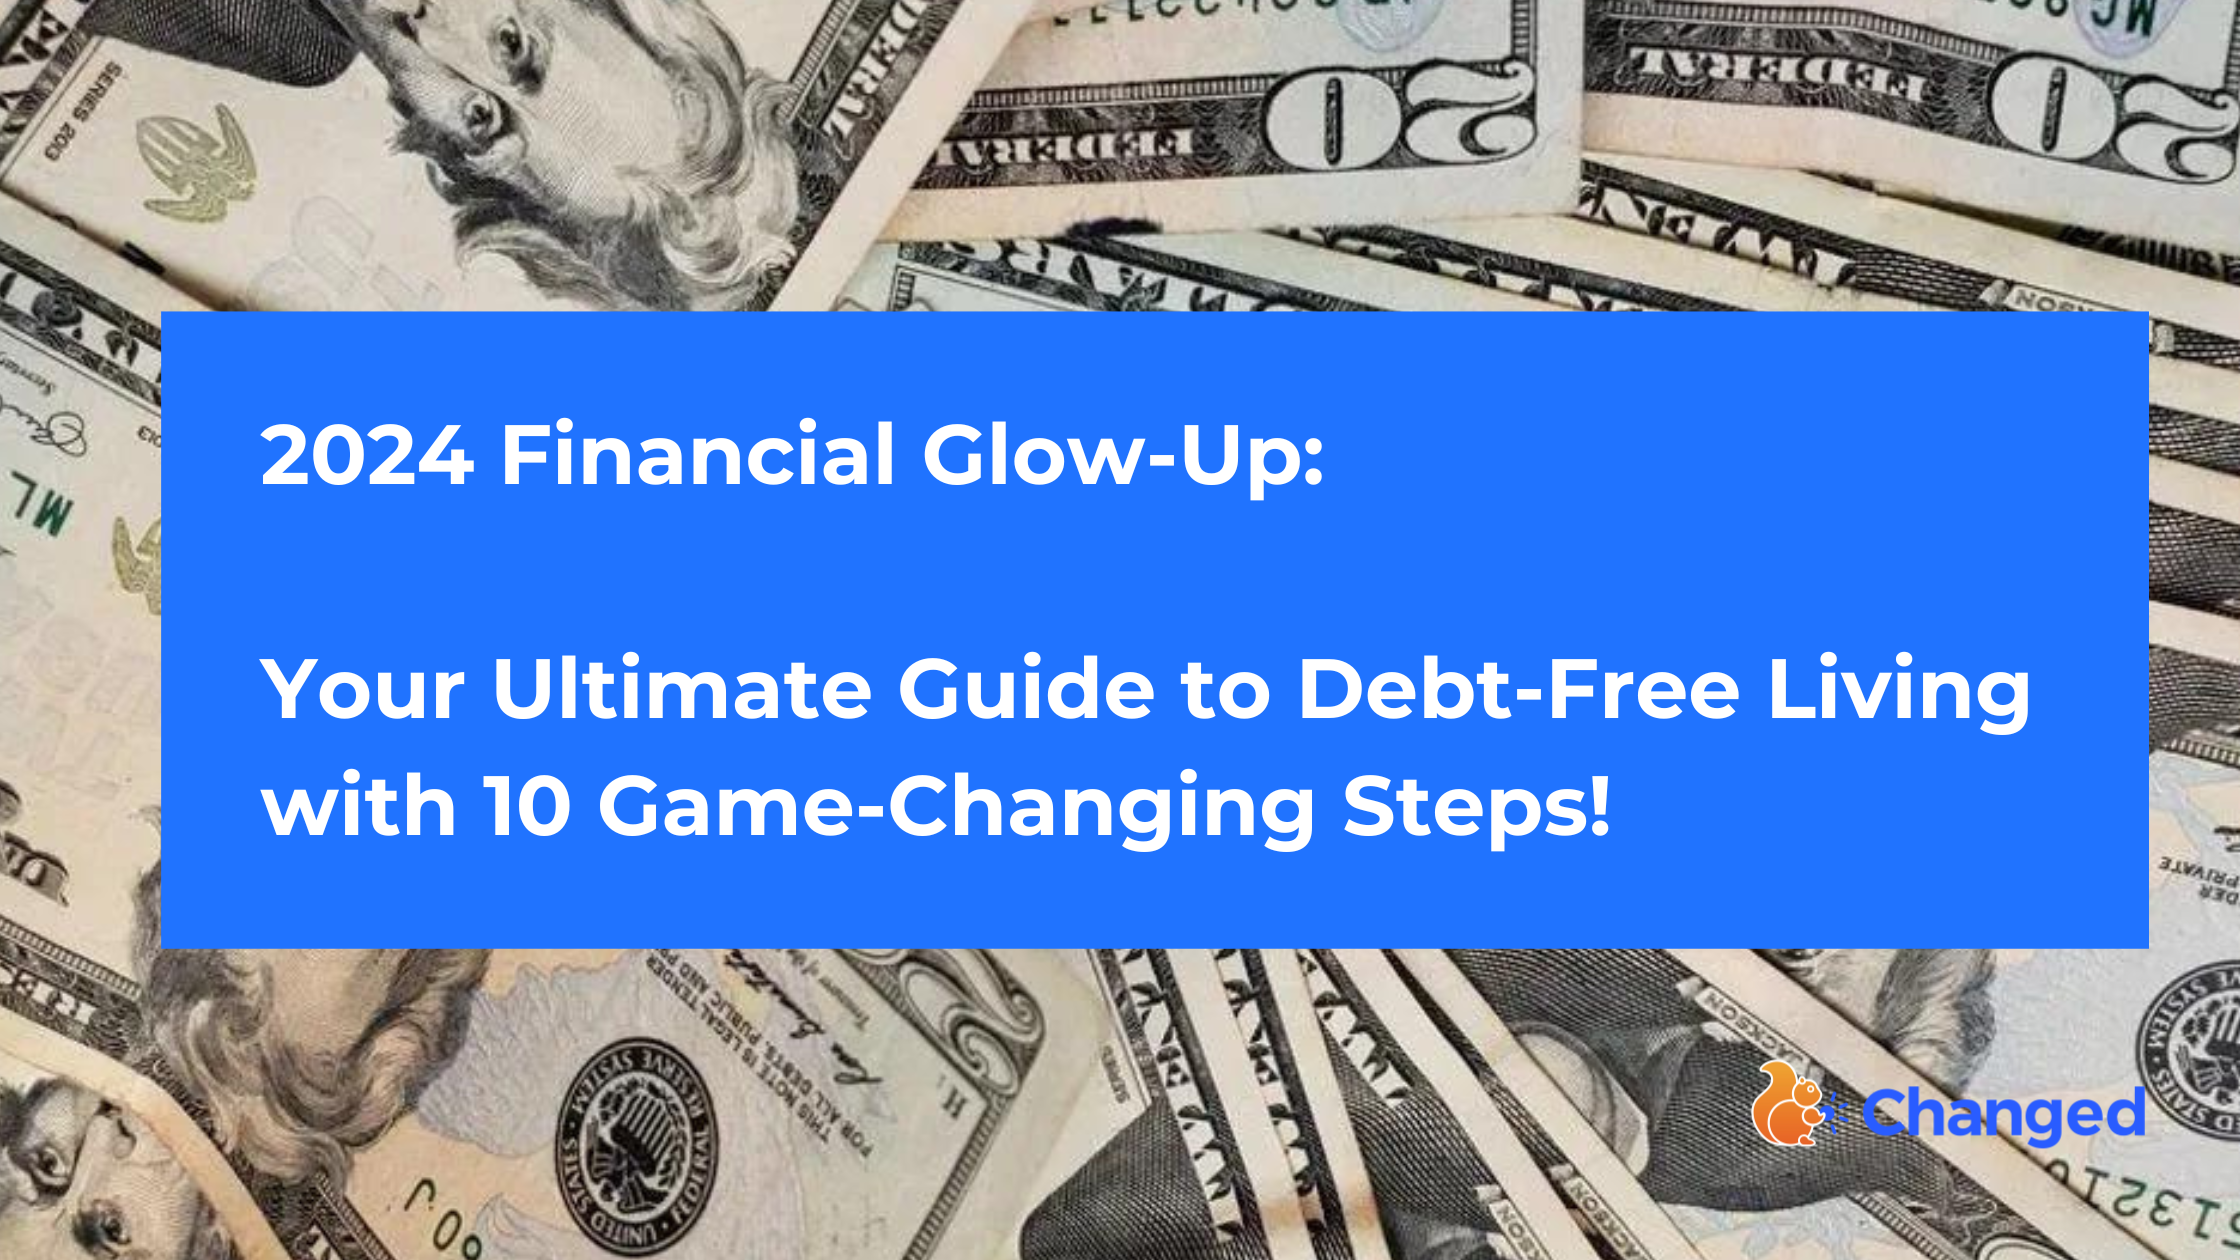 2024 Financial Glow-Up: Your Ultimate Guide to Debt-Free Living with 10 Game-Changing Steps!